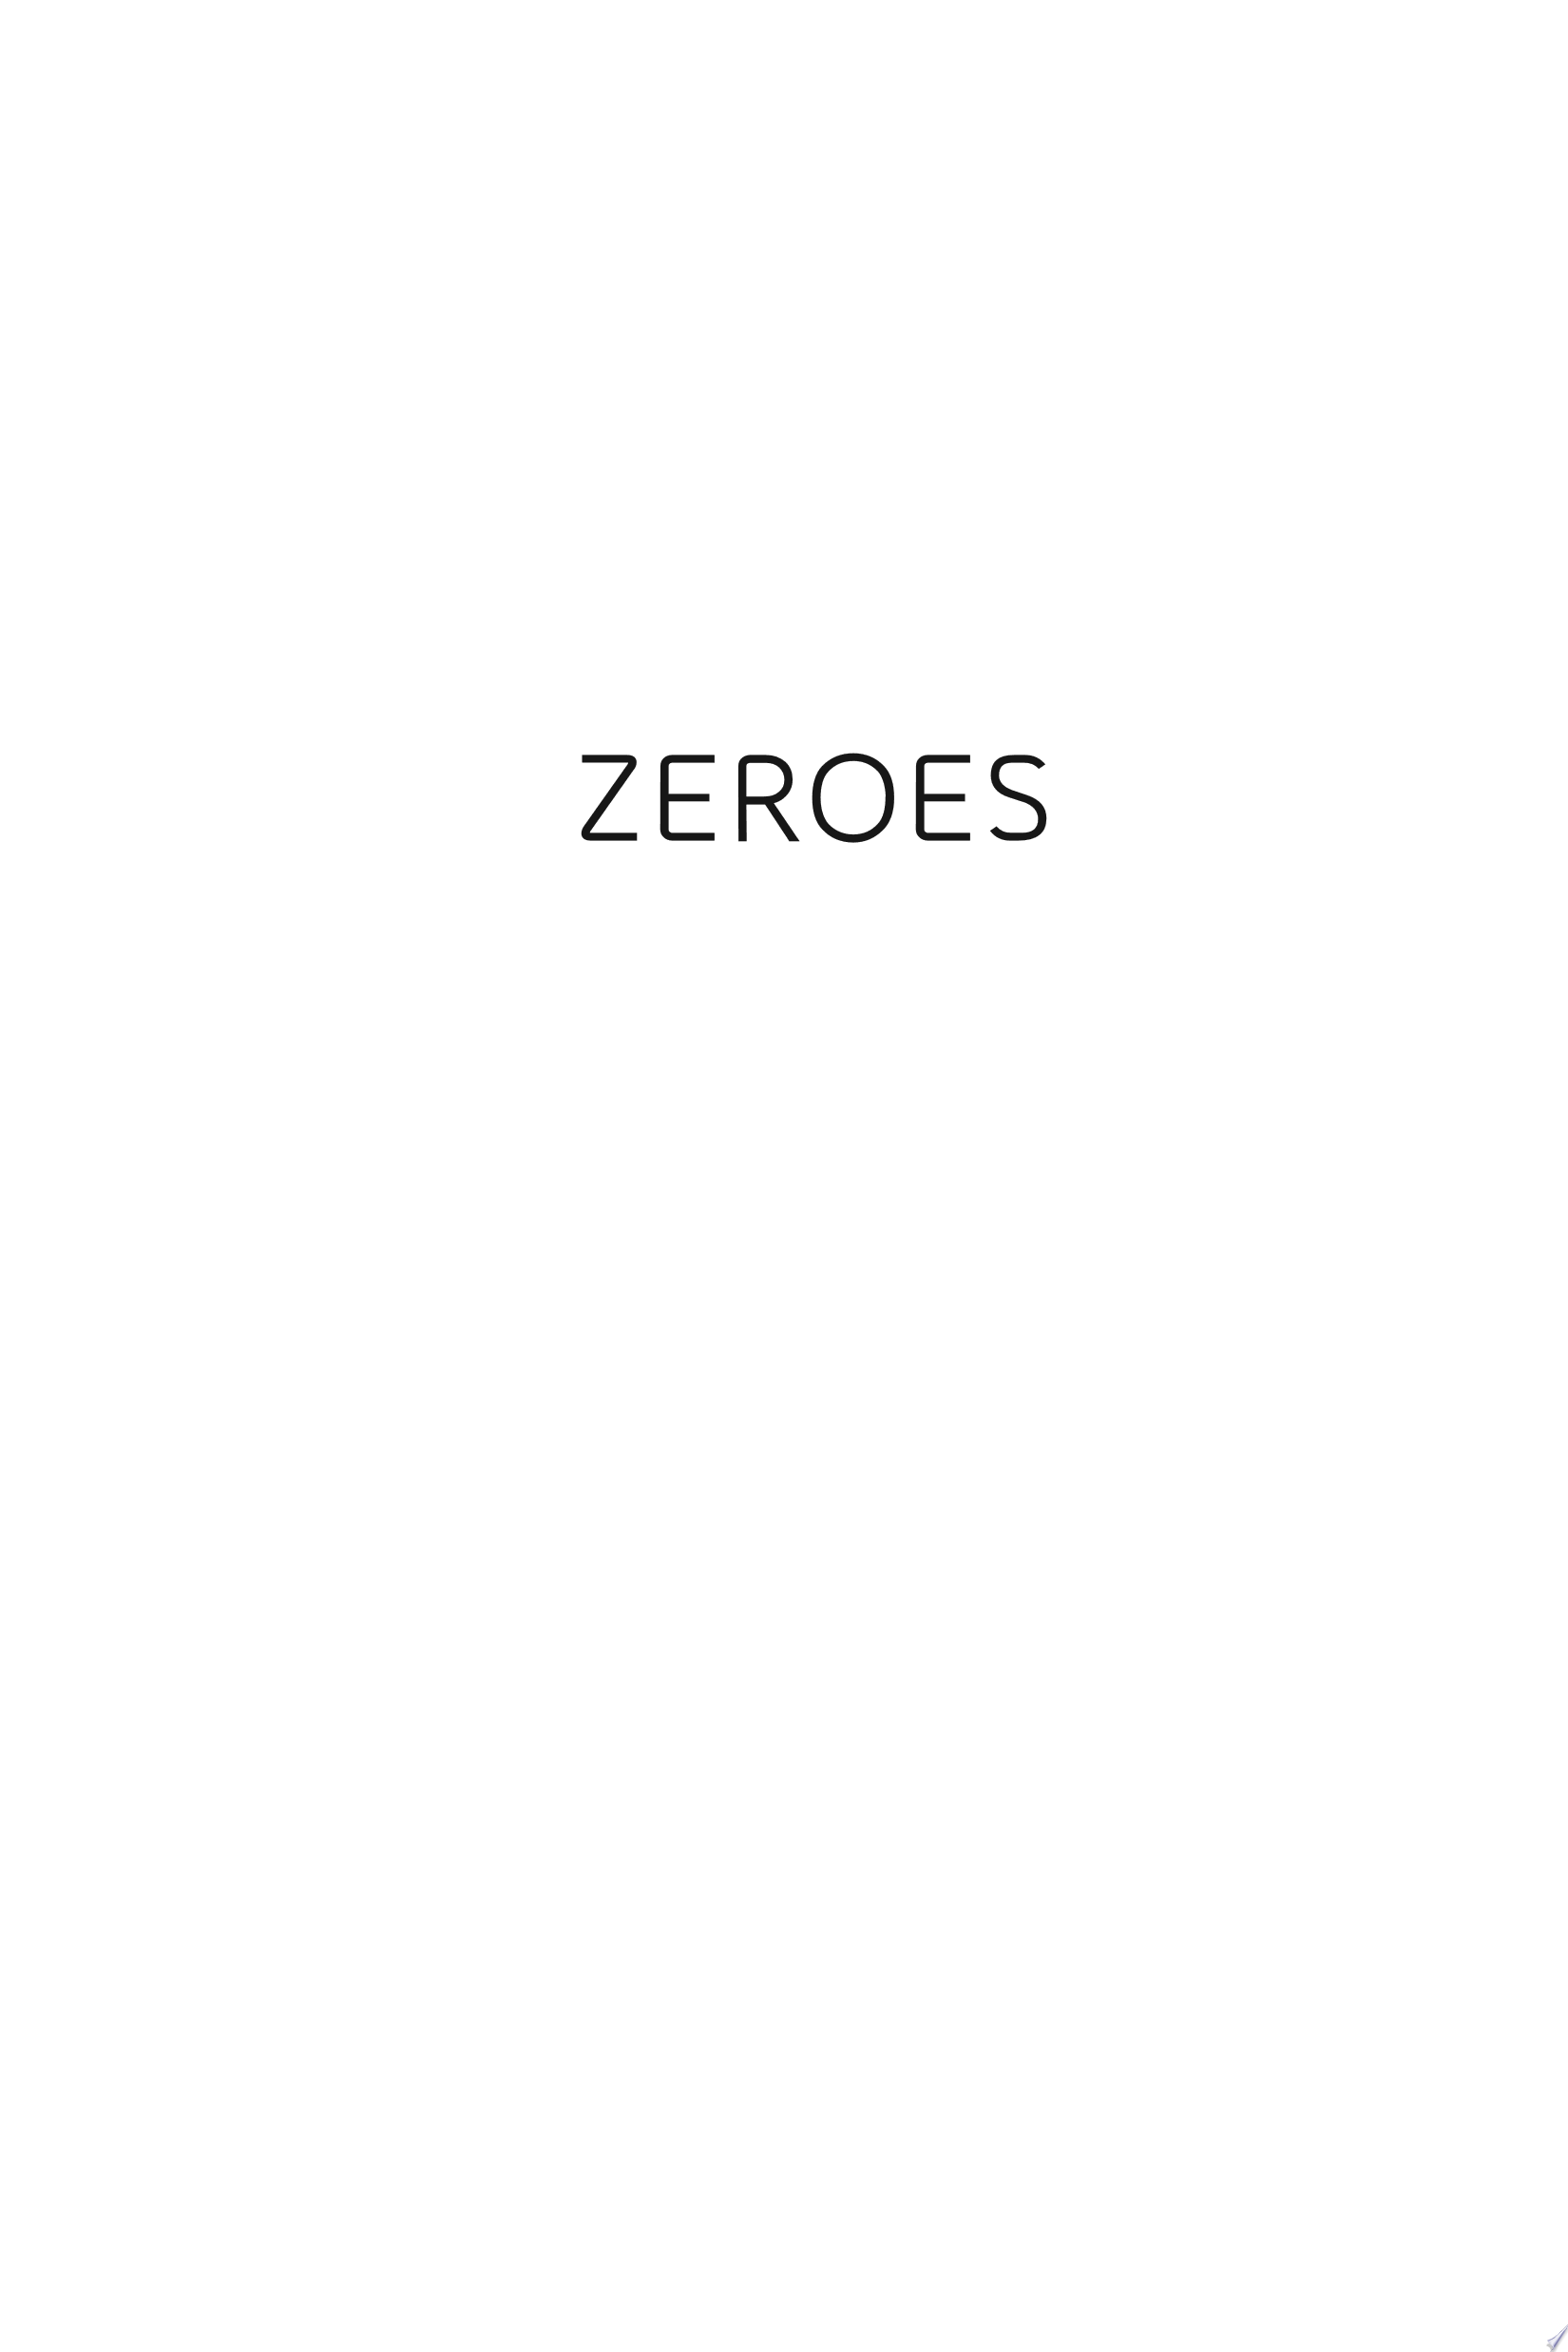 Image for "Zeroes"